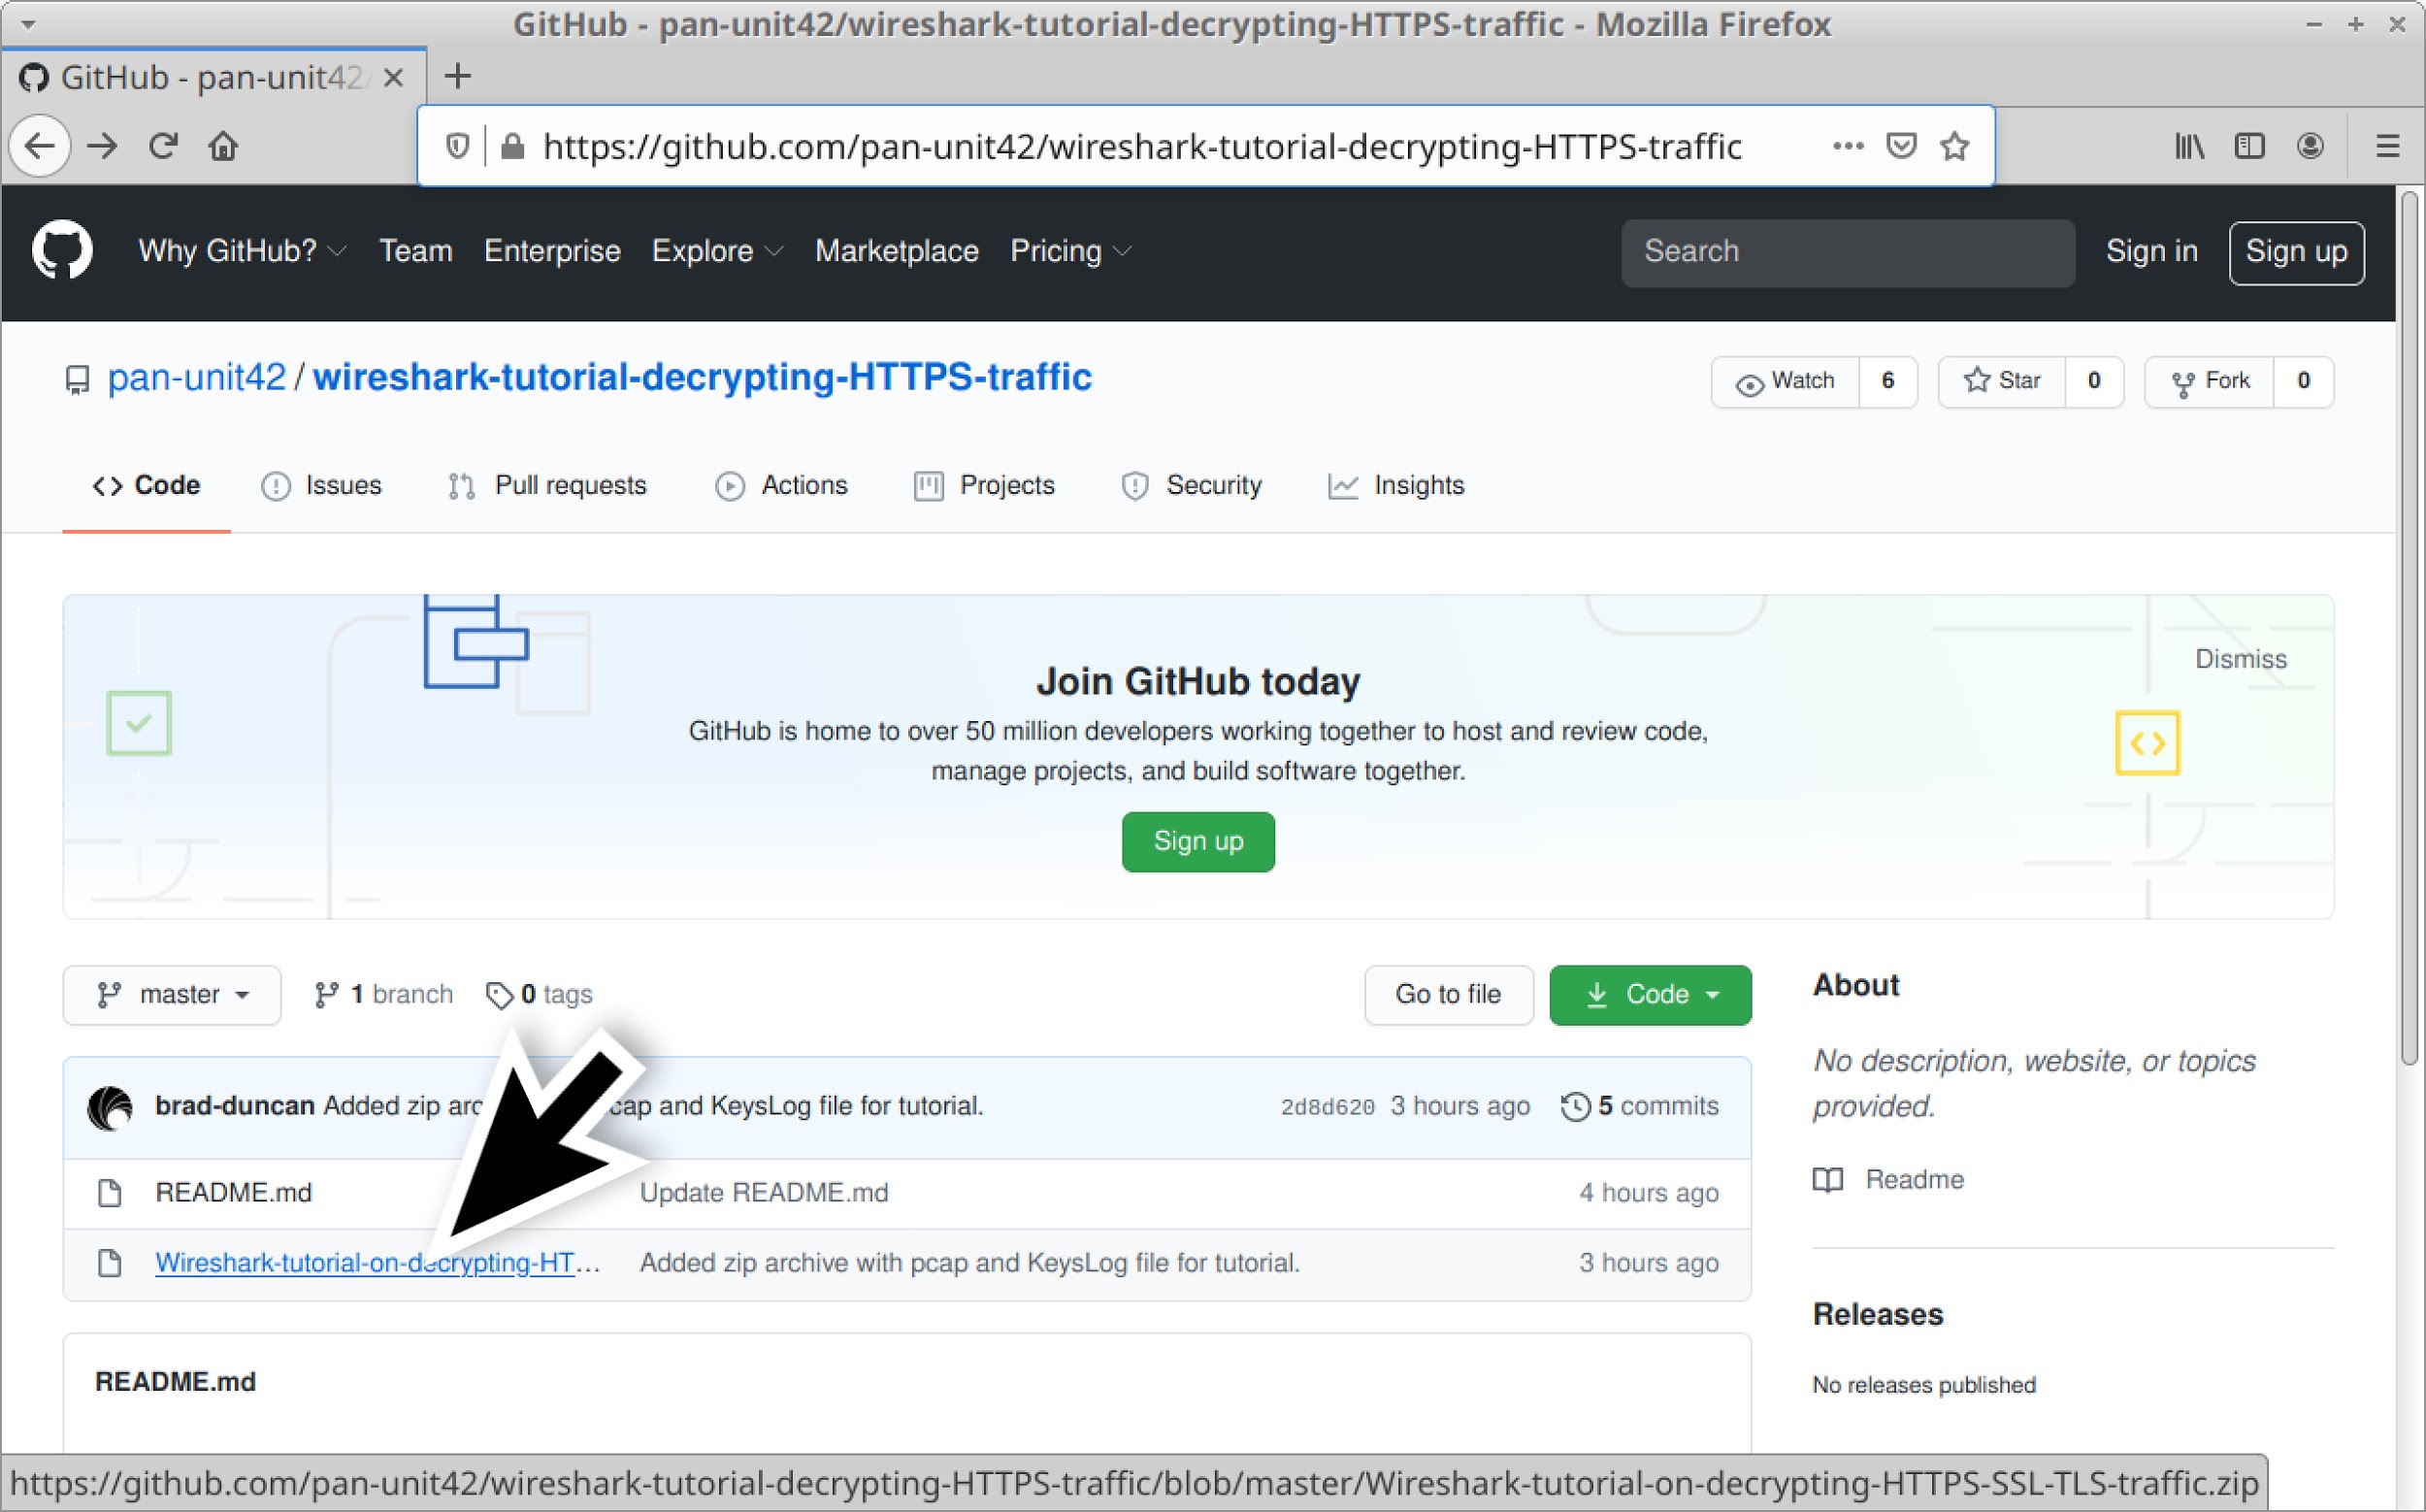 pan-unit42/wireshark-tutorial-decrypting-HTTPS-traffic - the screenshot shows the Github repository with the link to the ZIP archive used for this tutorial on decrypting HTTPS traffic. 